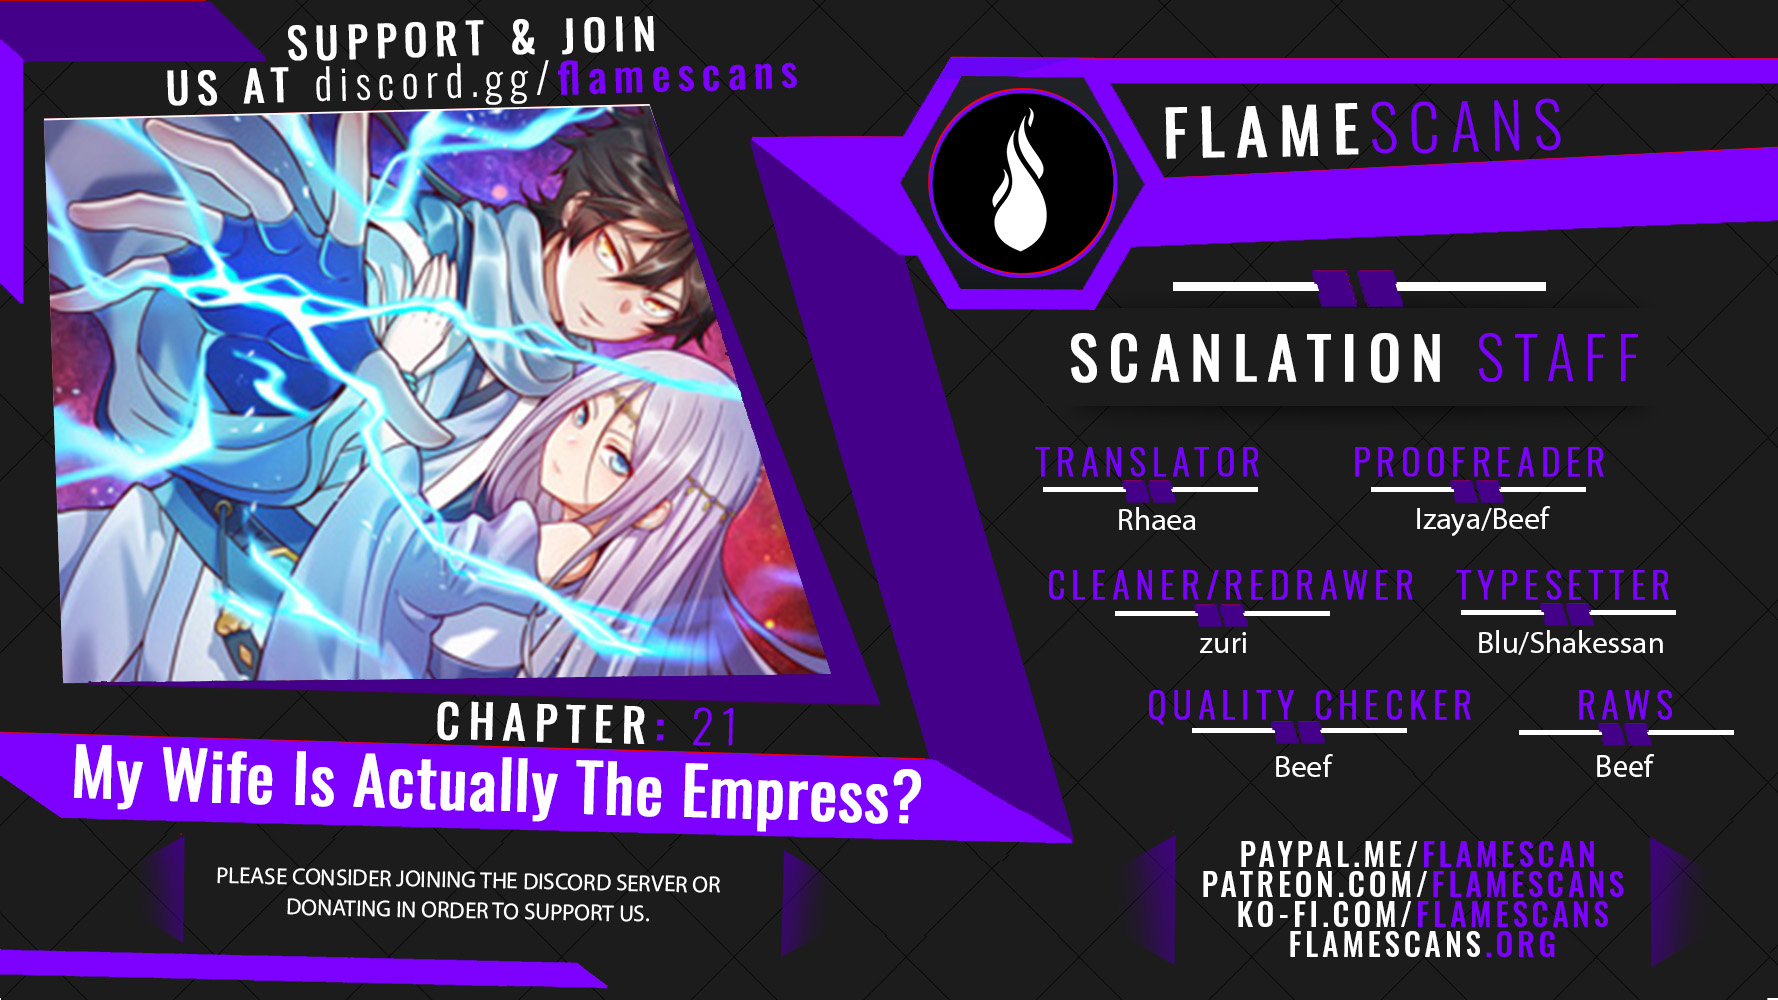 My Wife Is Actually The Empress? - Chapter 5060 - Image 1